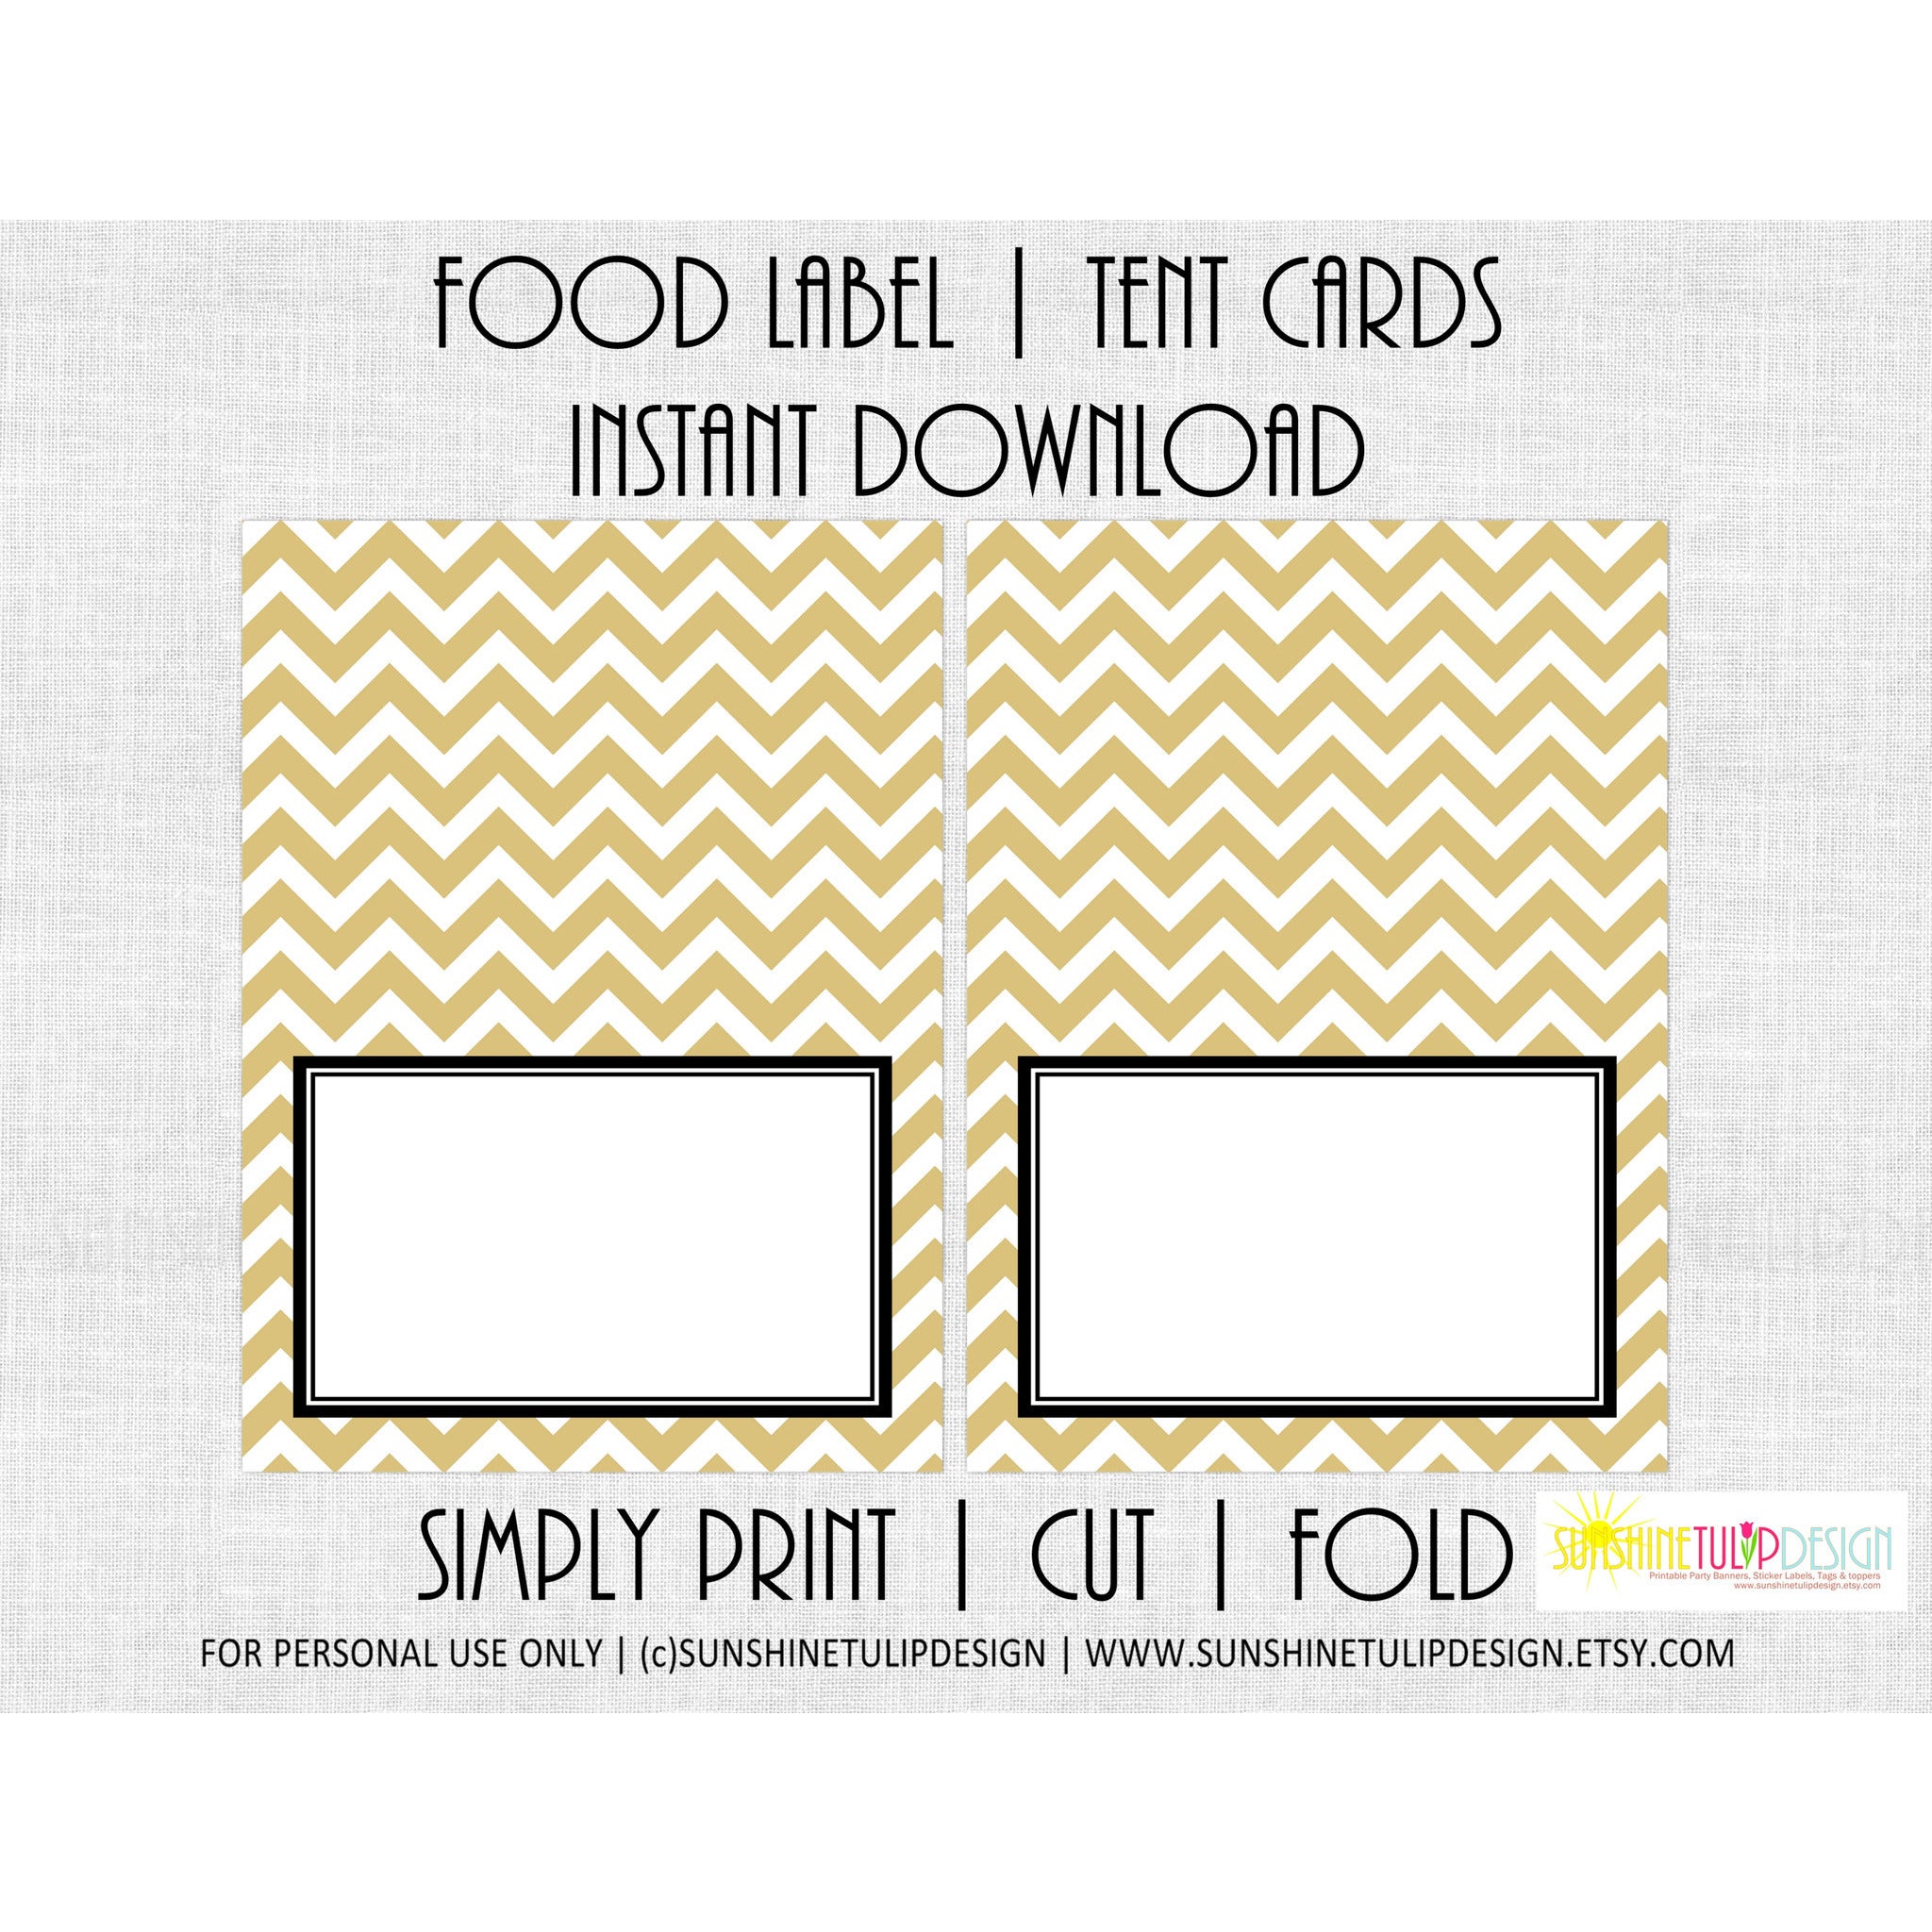 Free Printable Food Tent Cards Templates Transformers